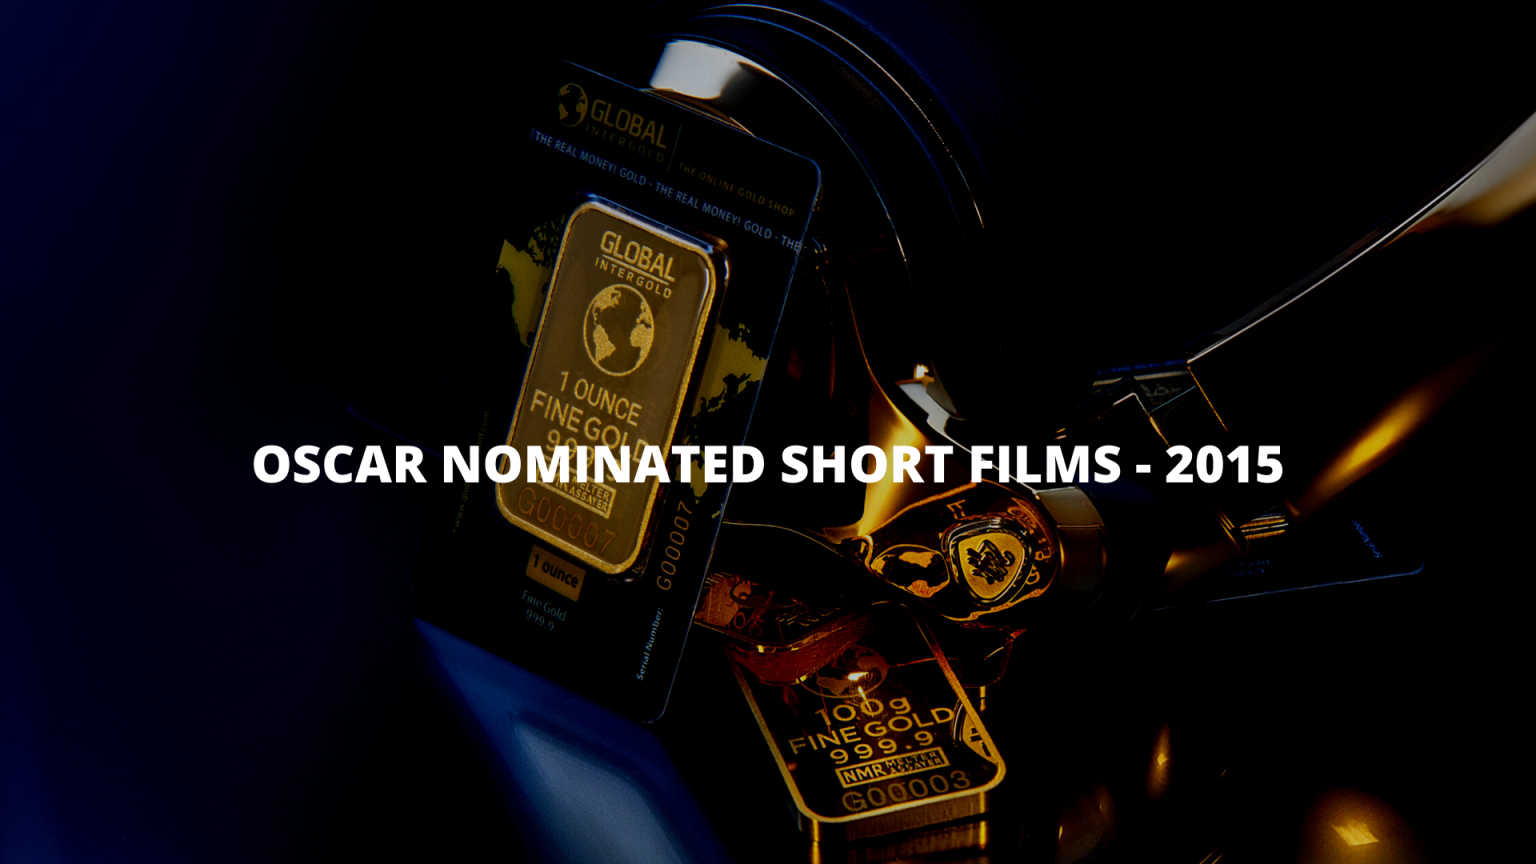 93rd Oscar Animation And Live Action Short Film Nominees List Shortfundly 4235